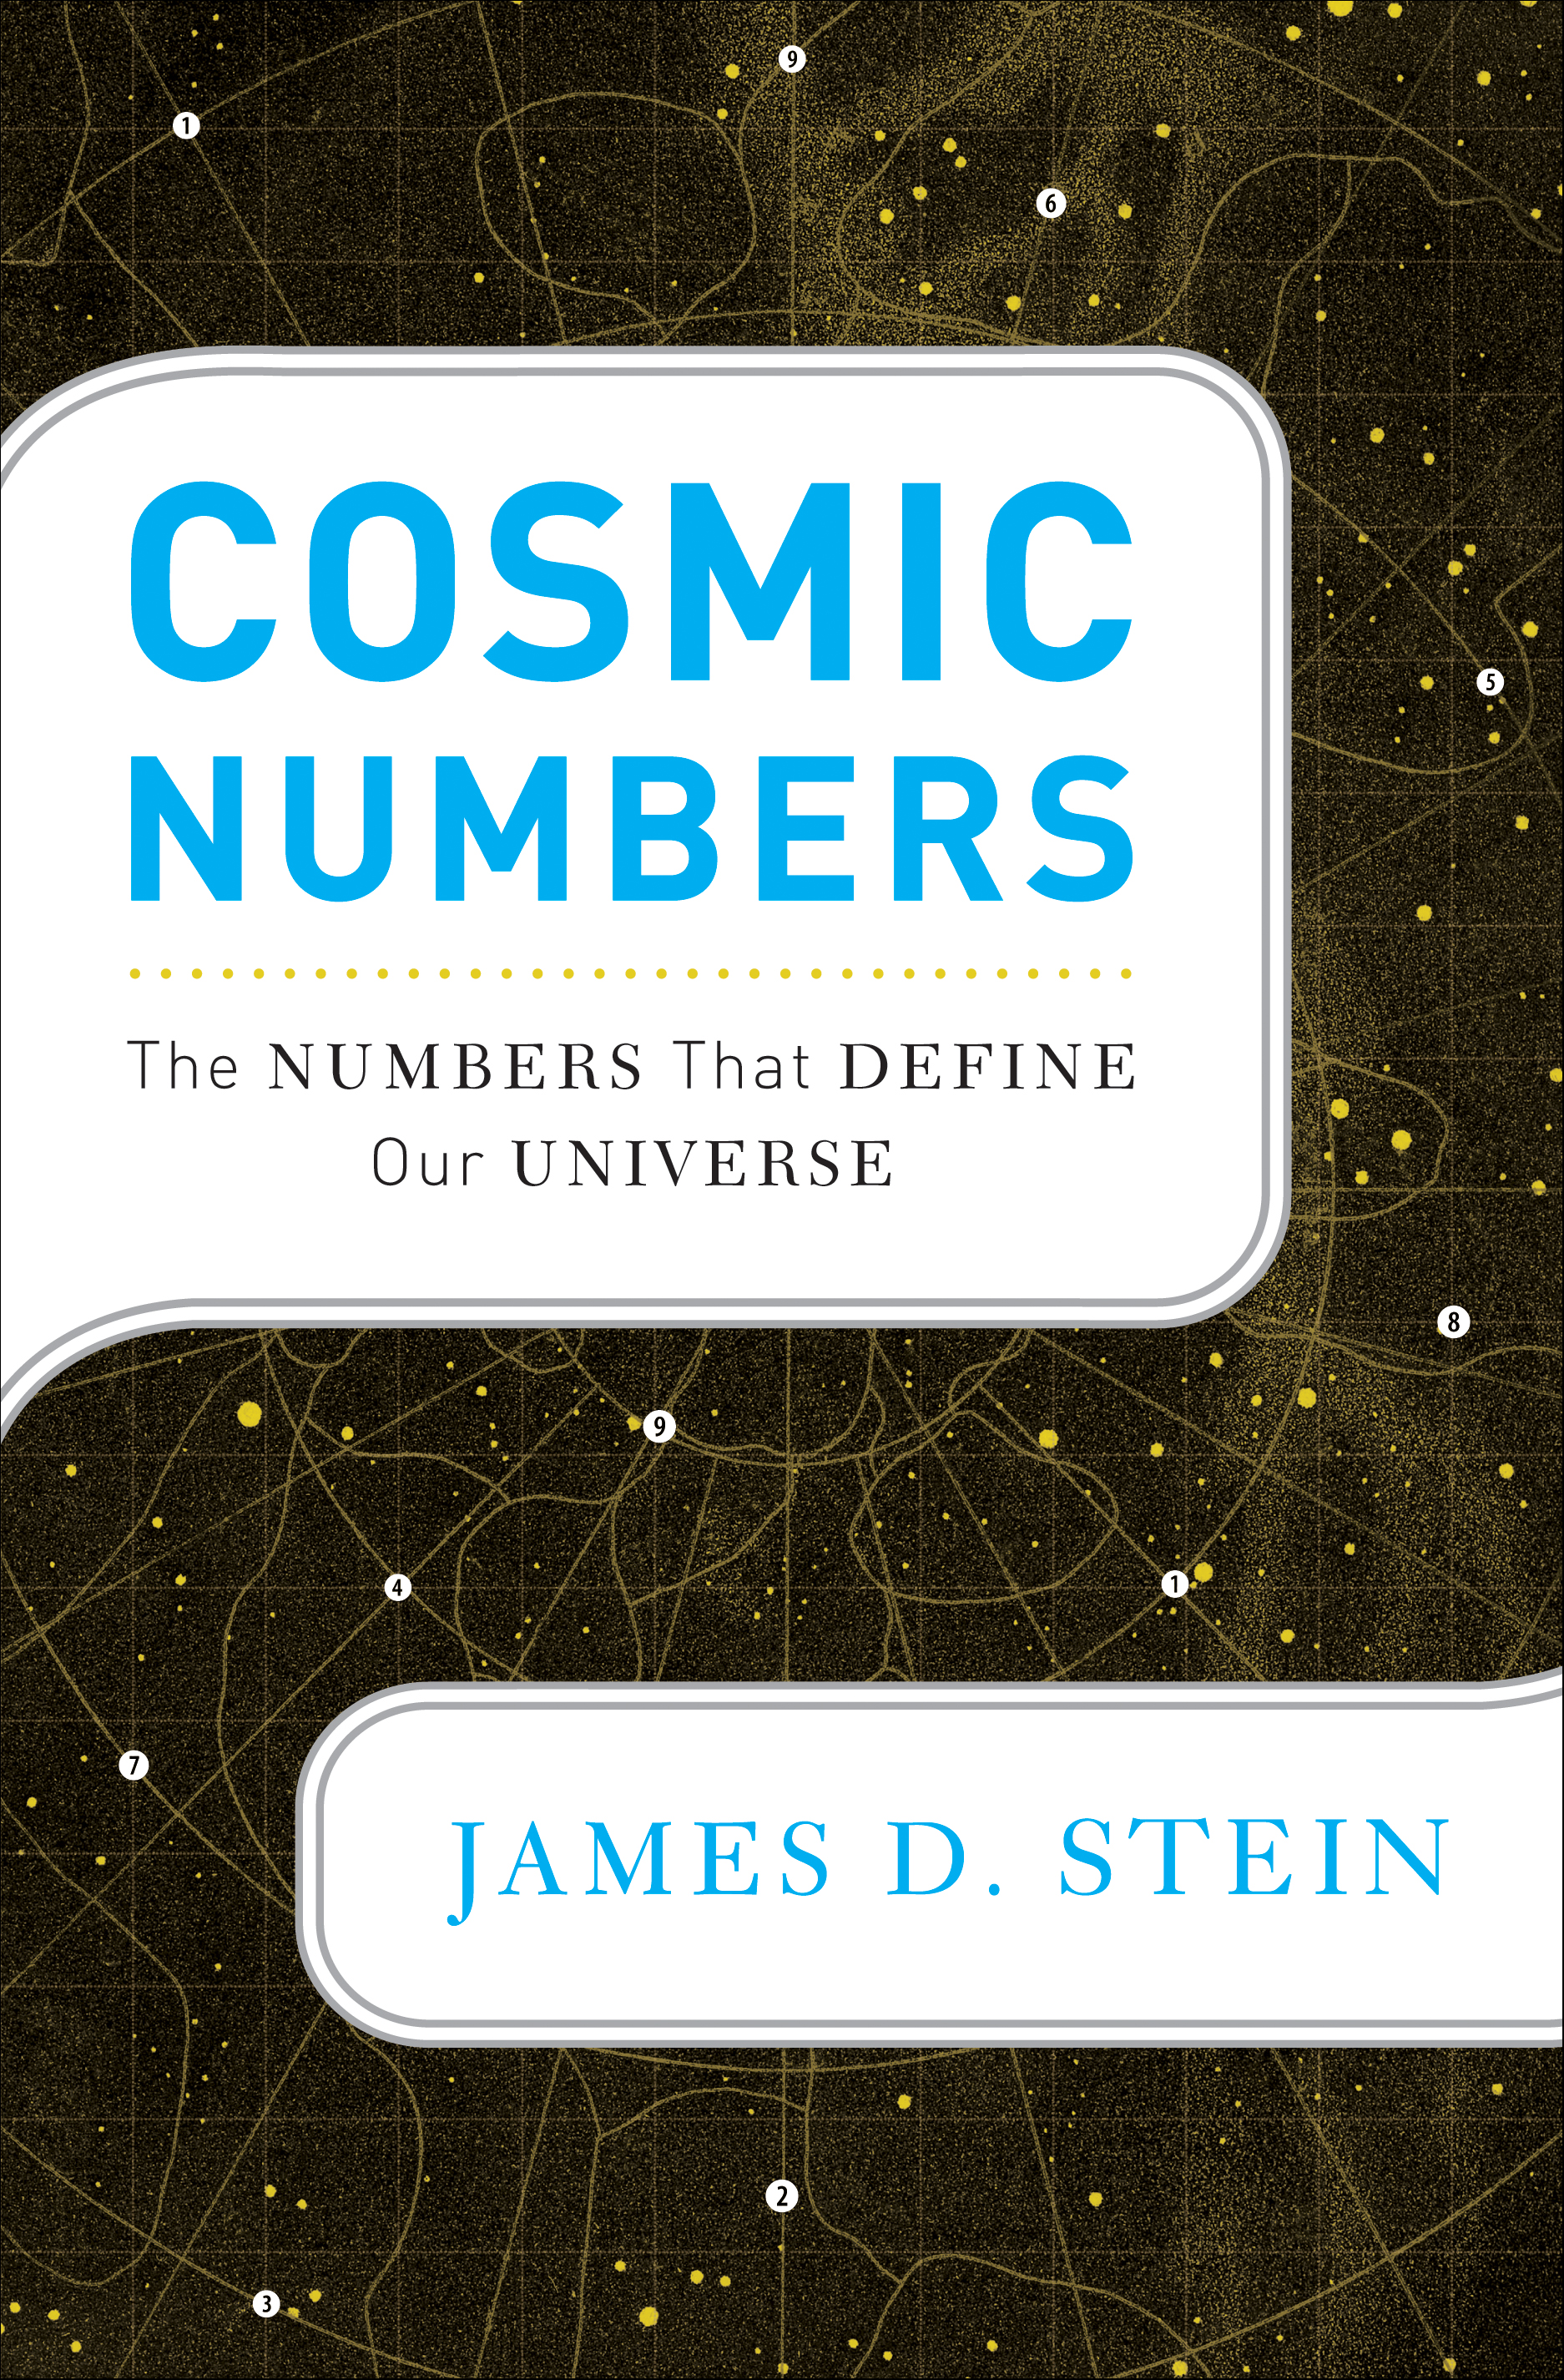 COSMIC NUMBERS: The Numbers That Define Our Universe